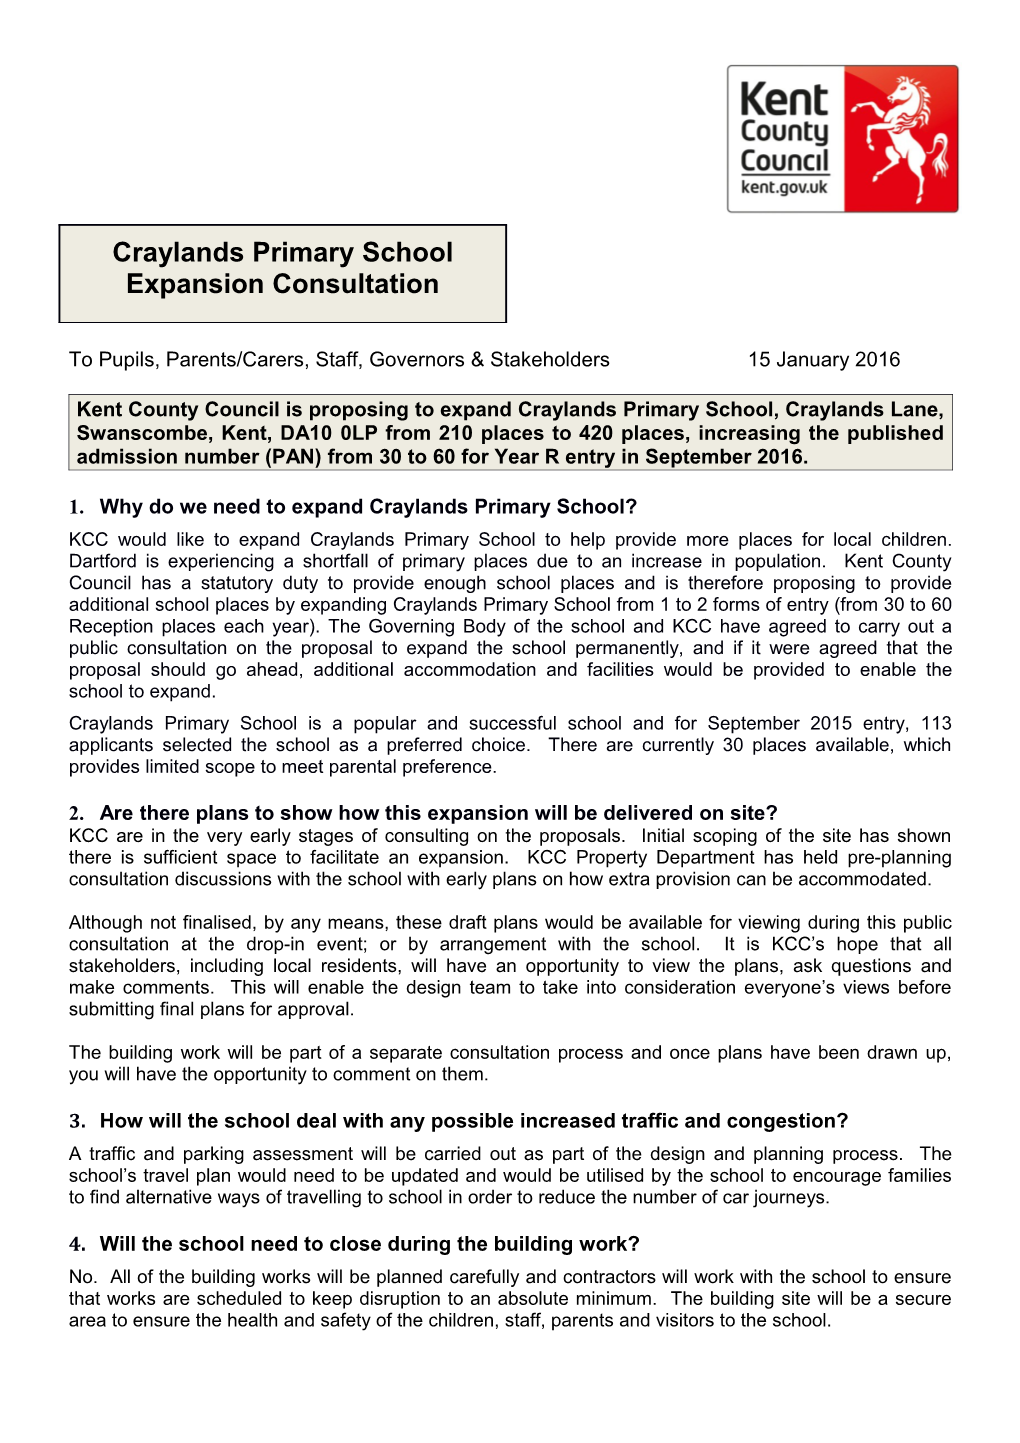 1.Why Do We Need to Expand Craylands Primary School?